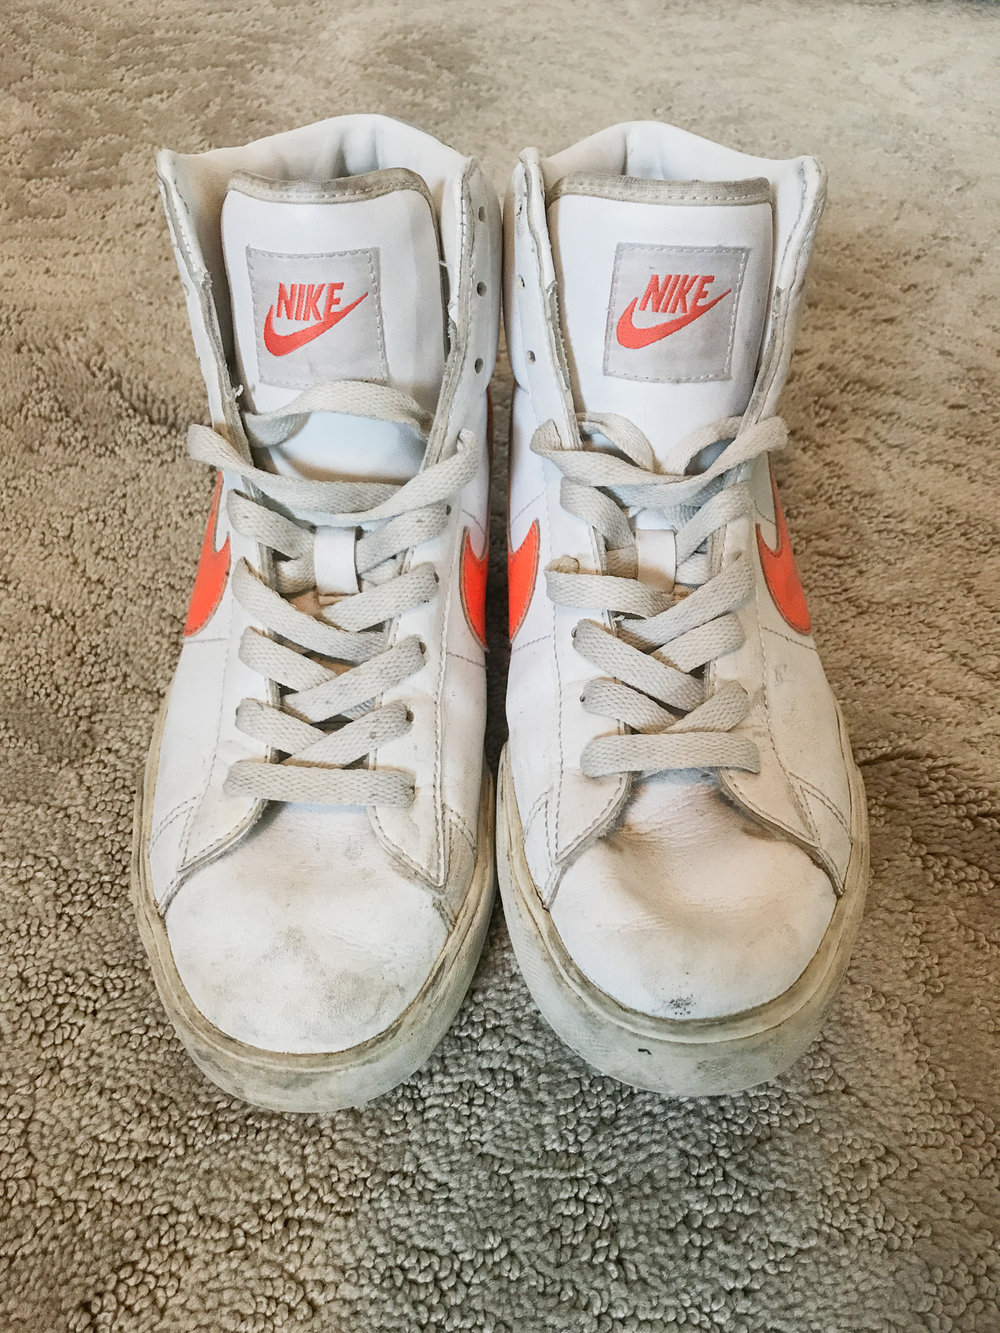 Revamp Nike Shoes | Painting DIY — From Coast to Coast